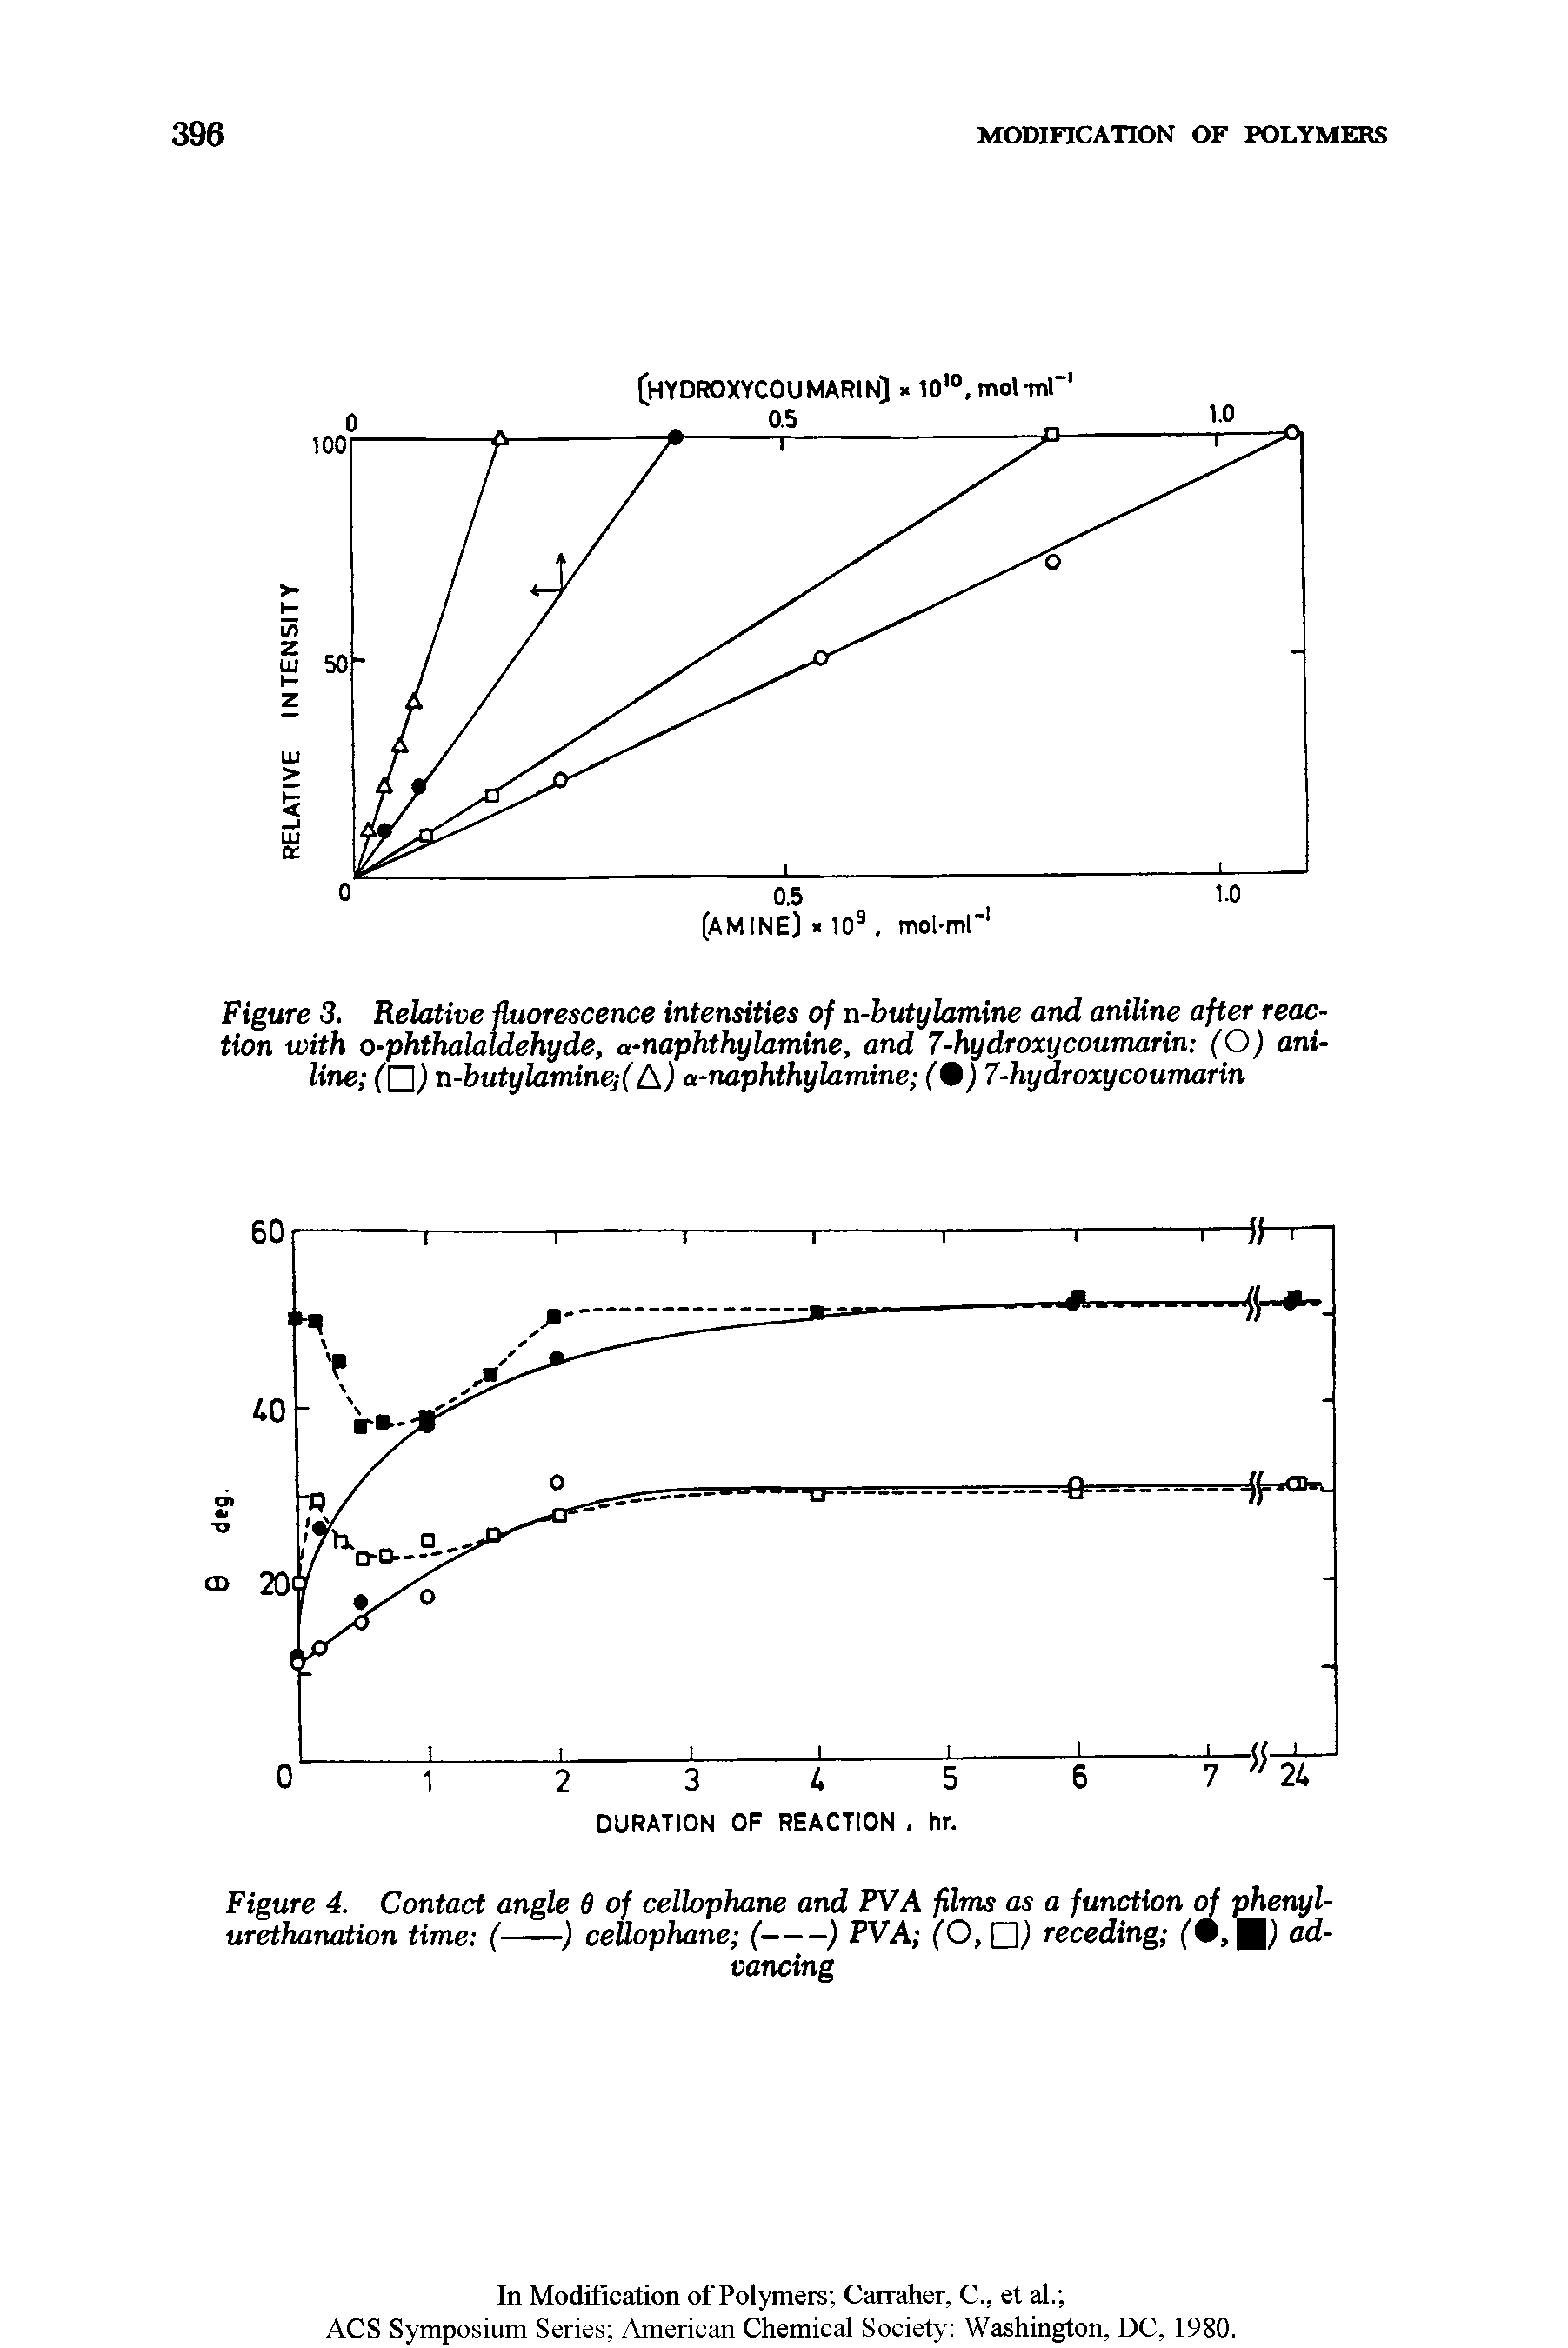 Figure 4. Contact angle 6 of cellophane and PVA films as a function of phenyl-urethanation time (---) cellophane (----) PVA (O, ,) receding ( .If) ad-...